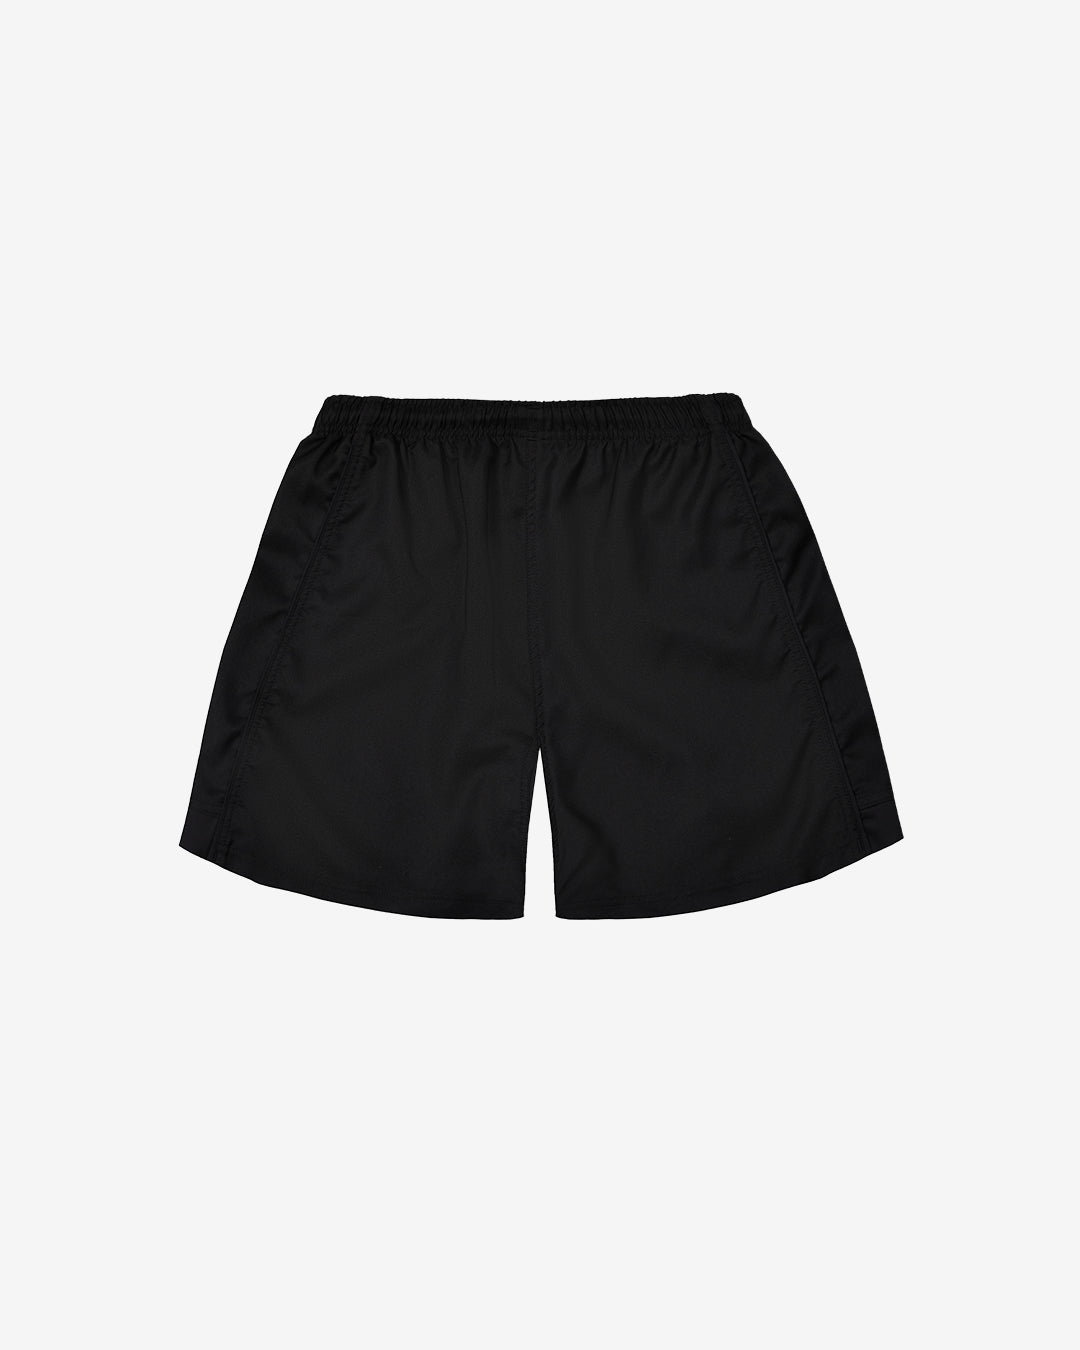 EP:0119 - Rugby Shorts - Black